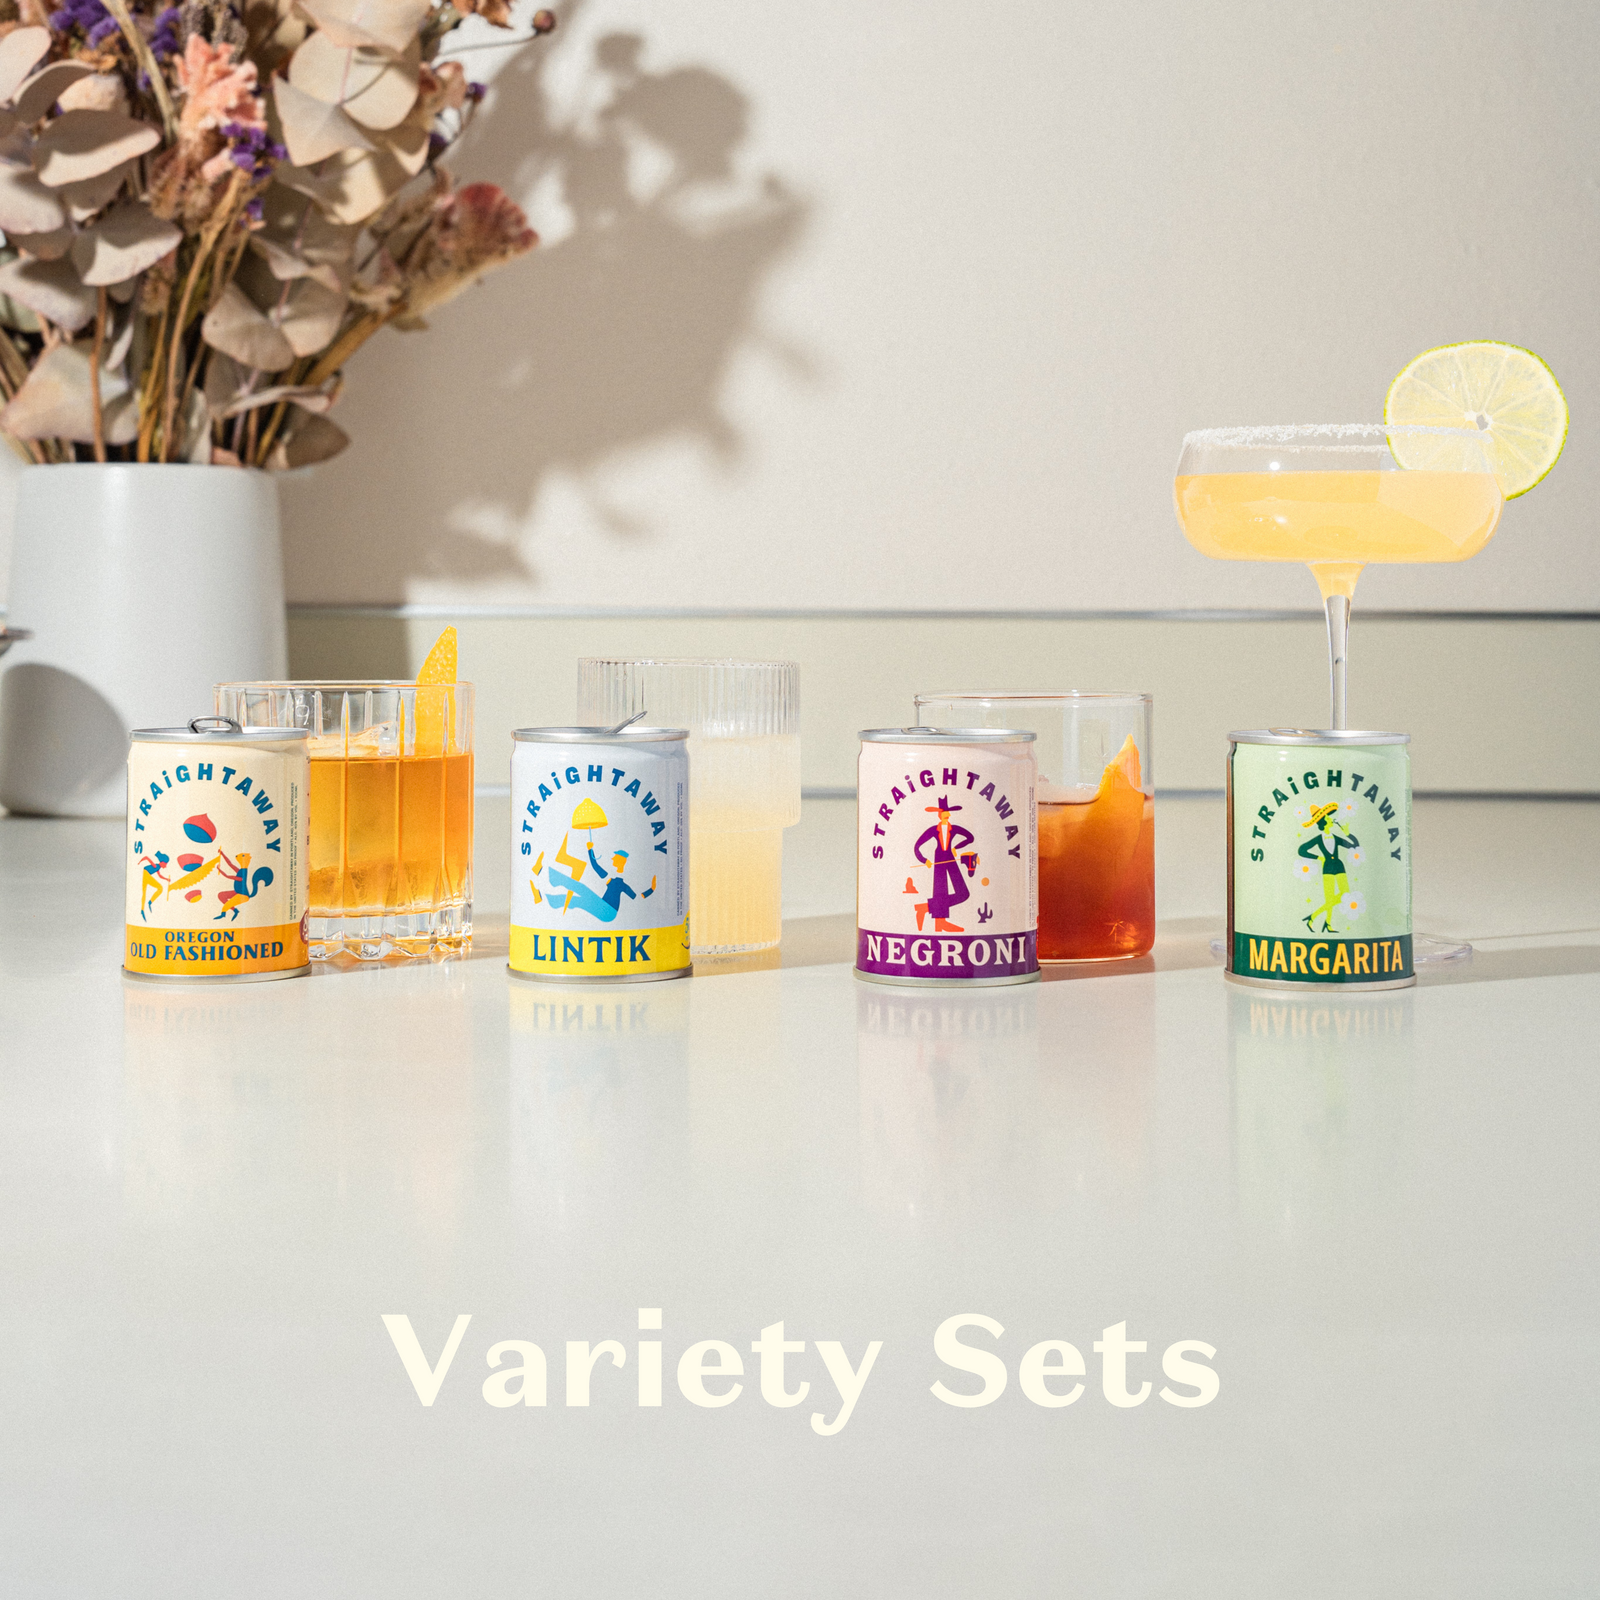 Variety Sets - Straightaway Cocktails